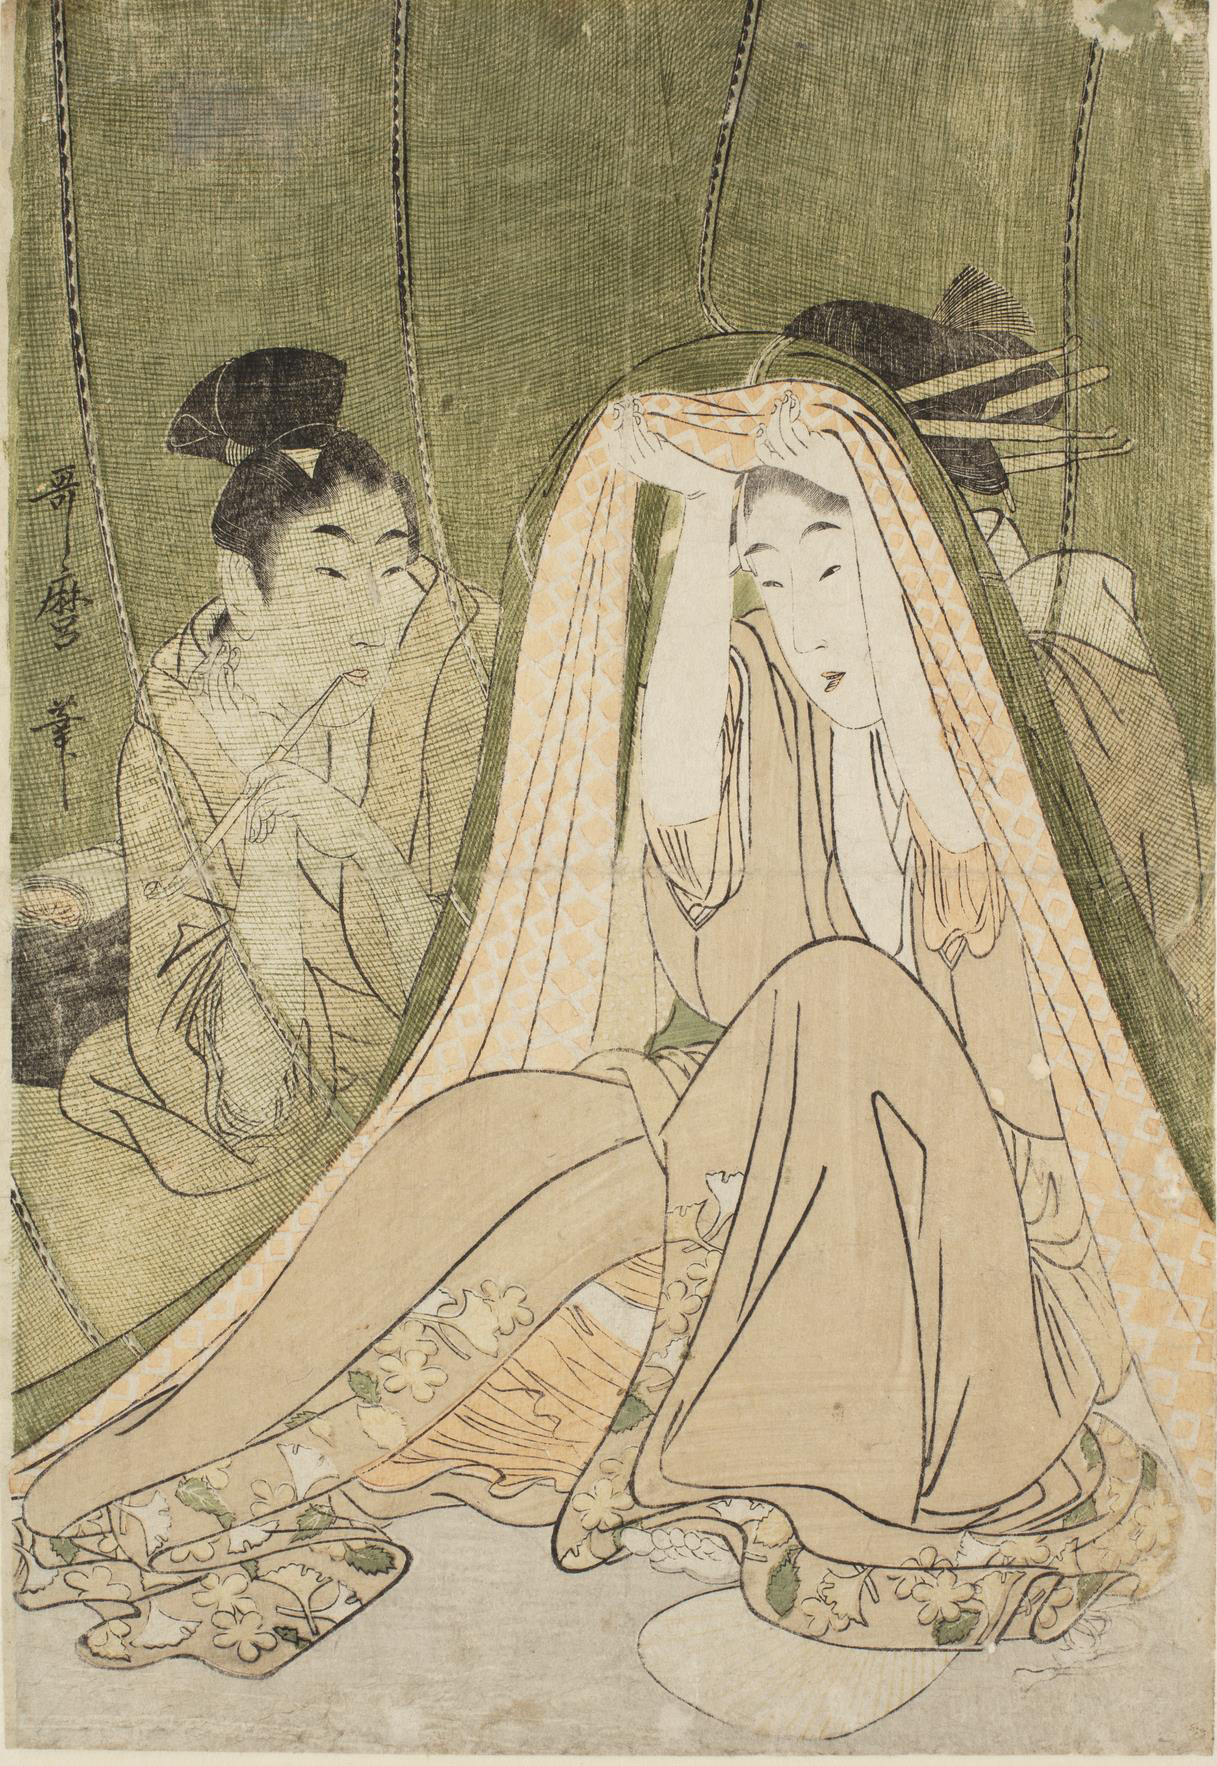 A Japanese print of two seated women dressed in traditional robes. One woman is pulling the mosquito net, which hangs down, over her head. The other person looks on behind the net .